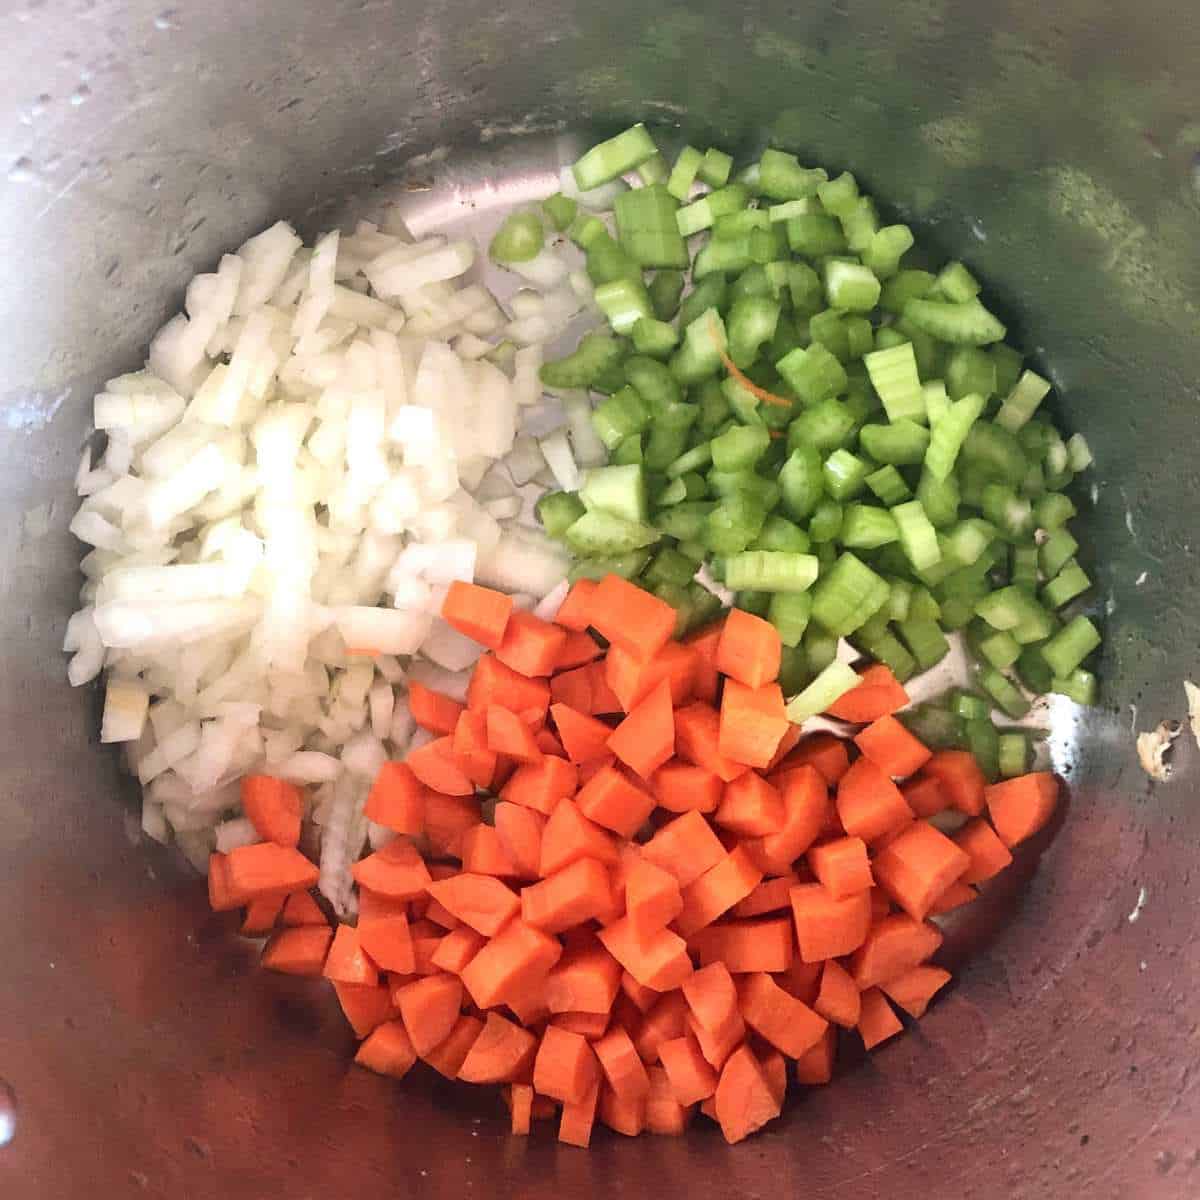 Diced carrots, celery, and onions cooking in a stockpot